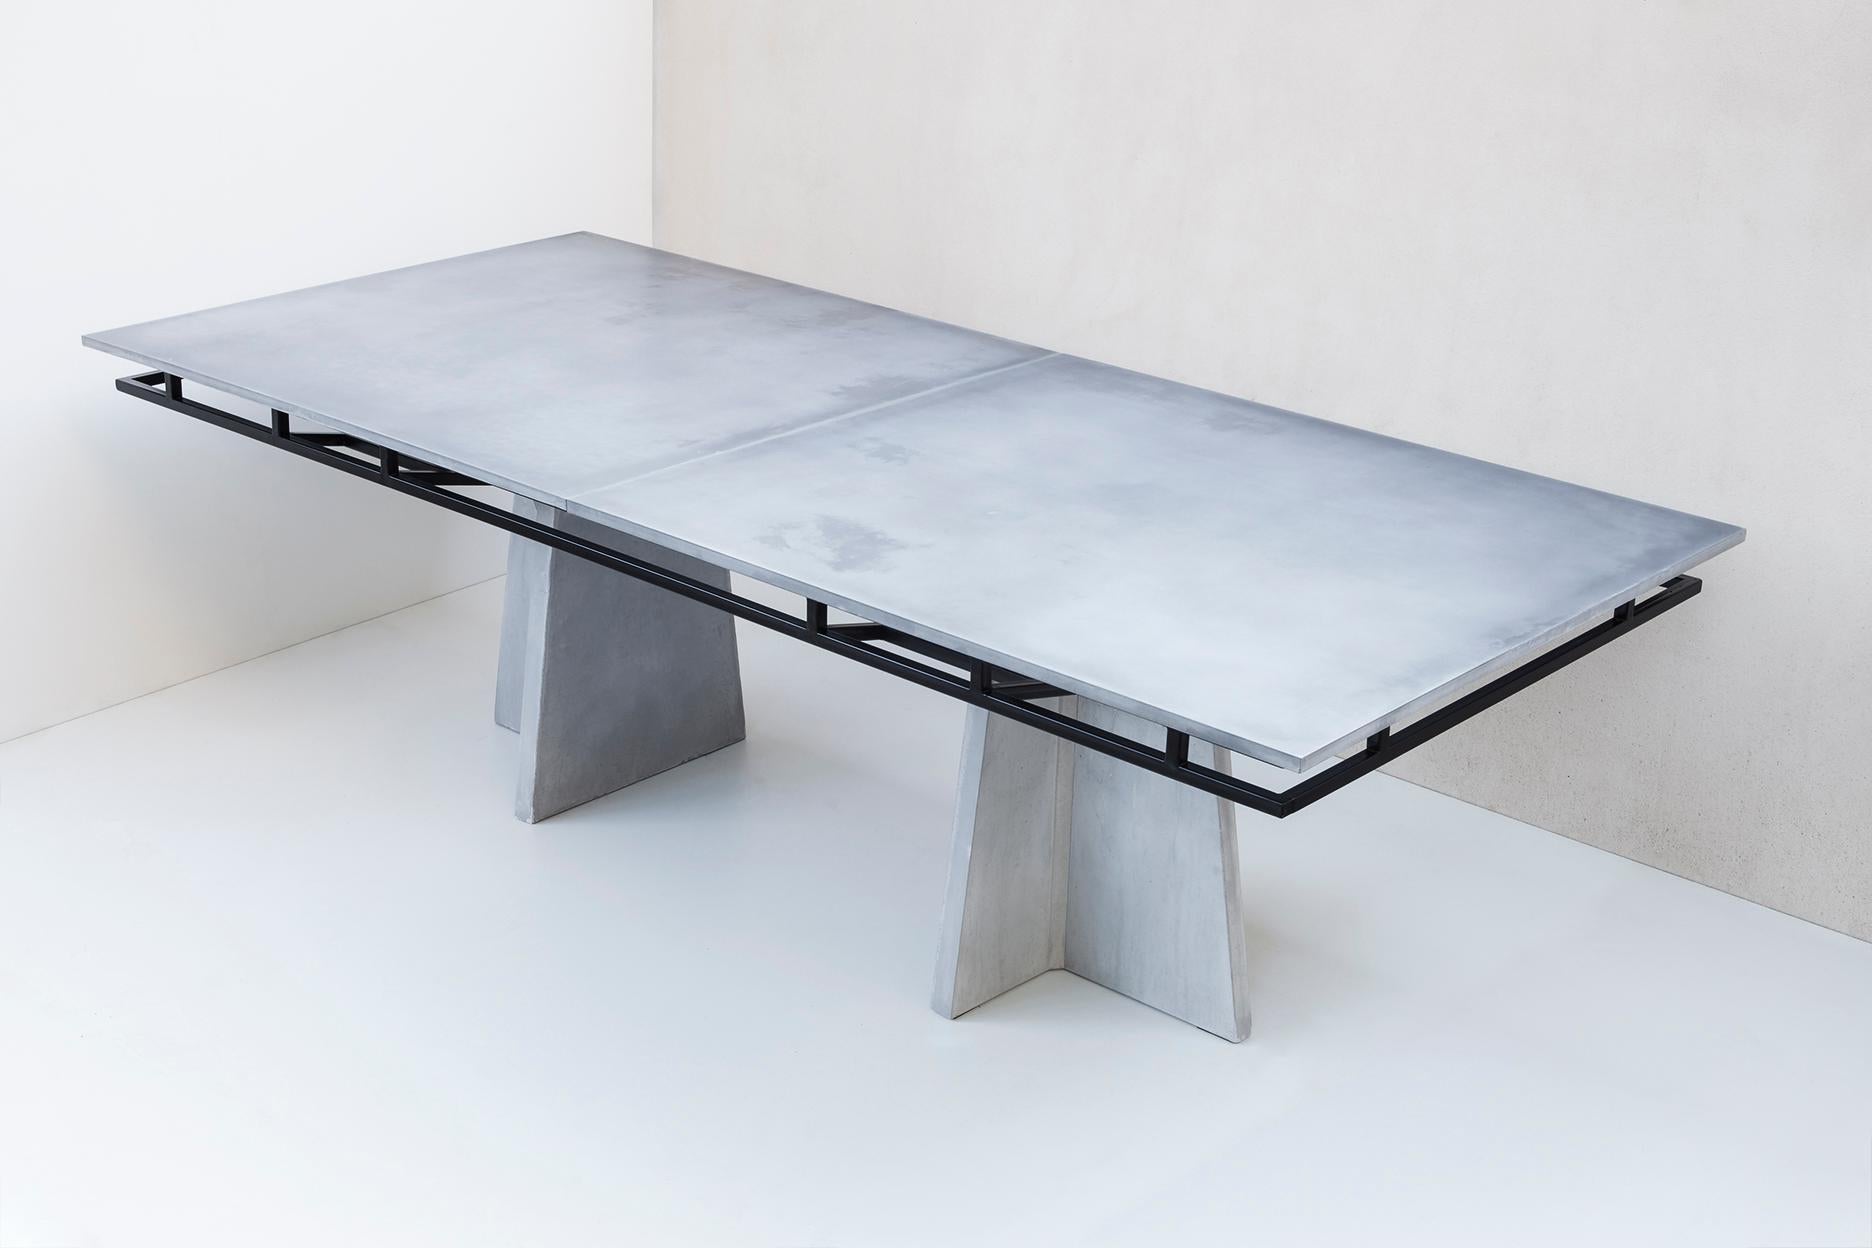 Dining table inspired by the infrastructures aesthetic. Concrete legs support a black painted structure that supports concrete plates. 
To use infrastructures as a design inspiration was led by the fascination in this kind of projects and to refer